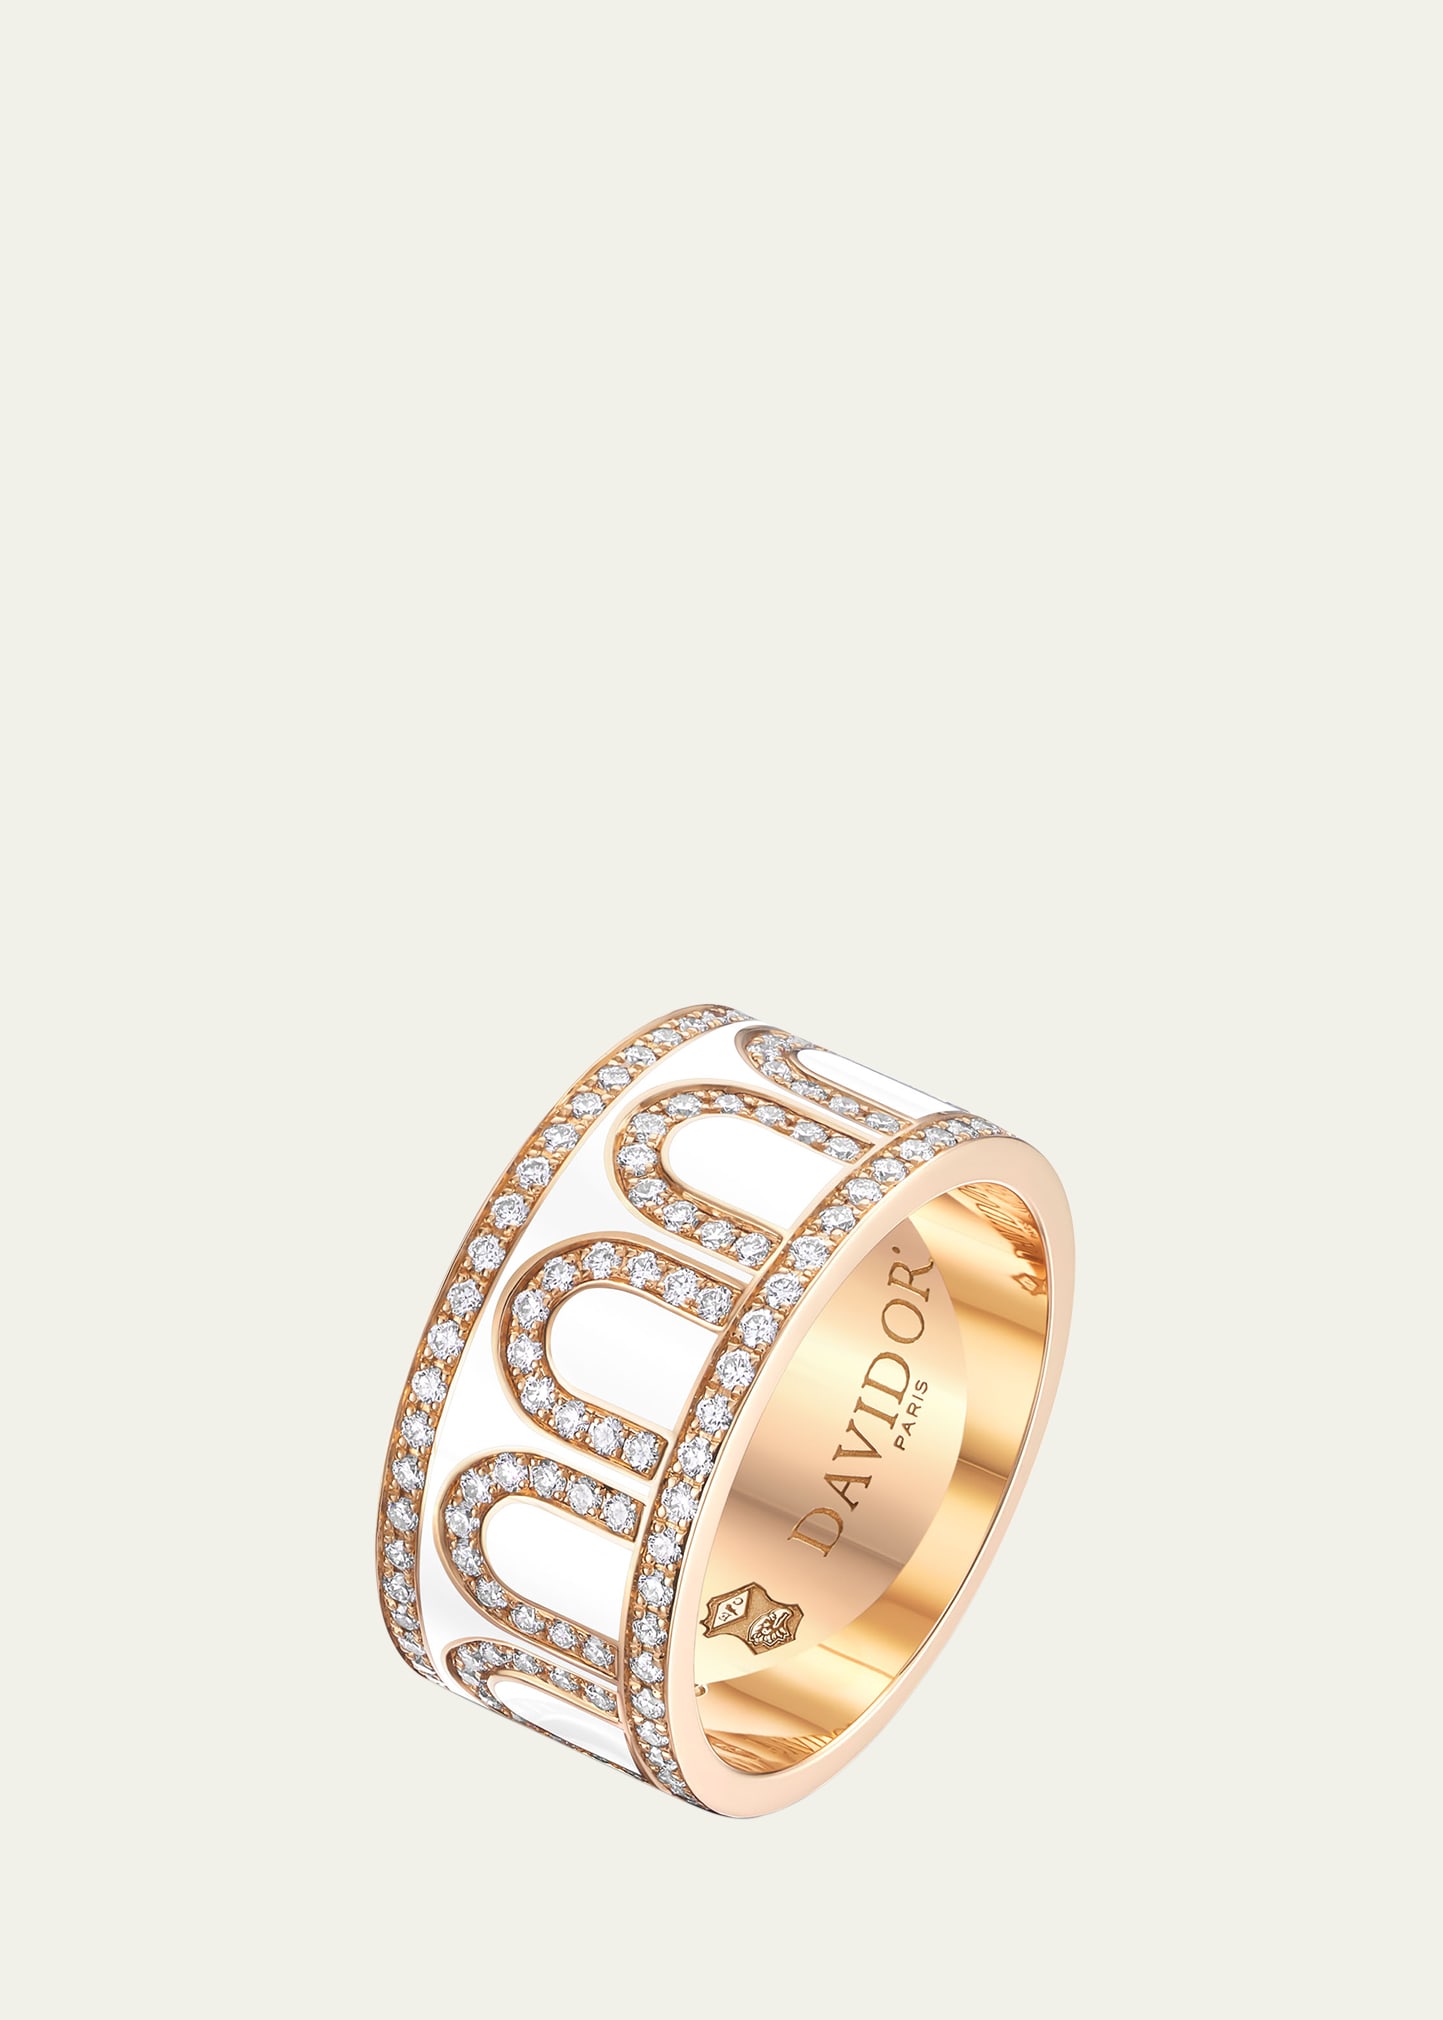 Davidor L'arc De  Ring Gm In 18k Rose Gold With Neige Lacquered Ceramic And Palais Diamonds